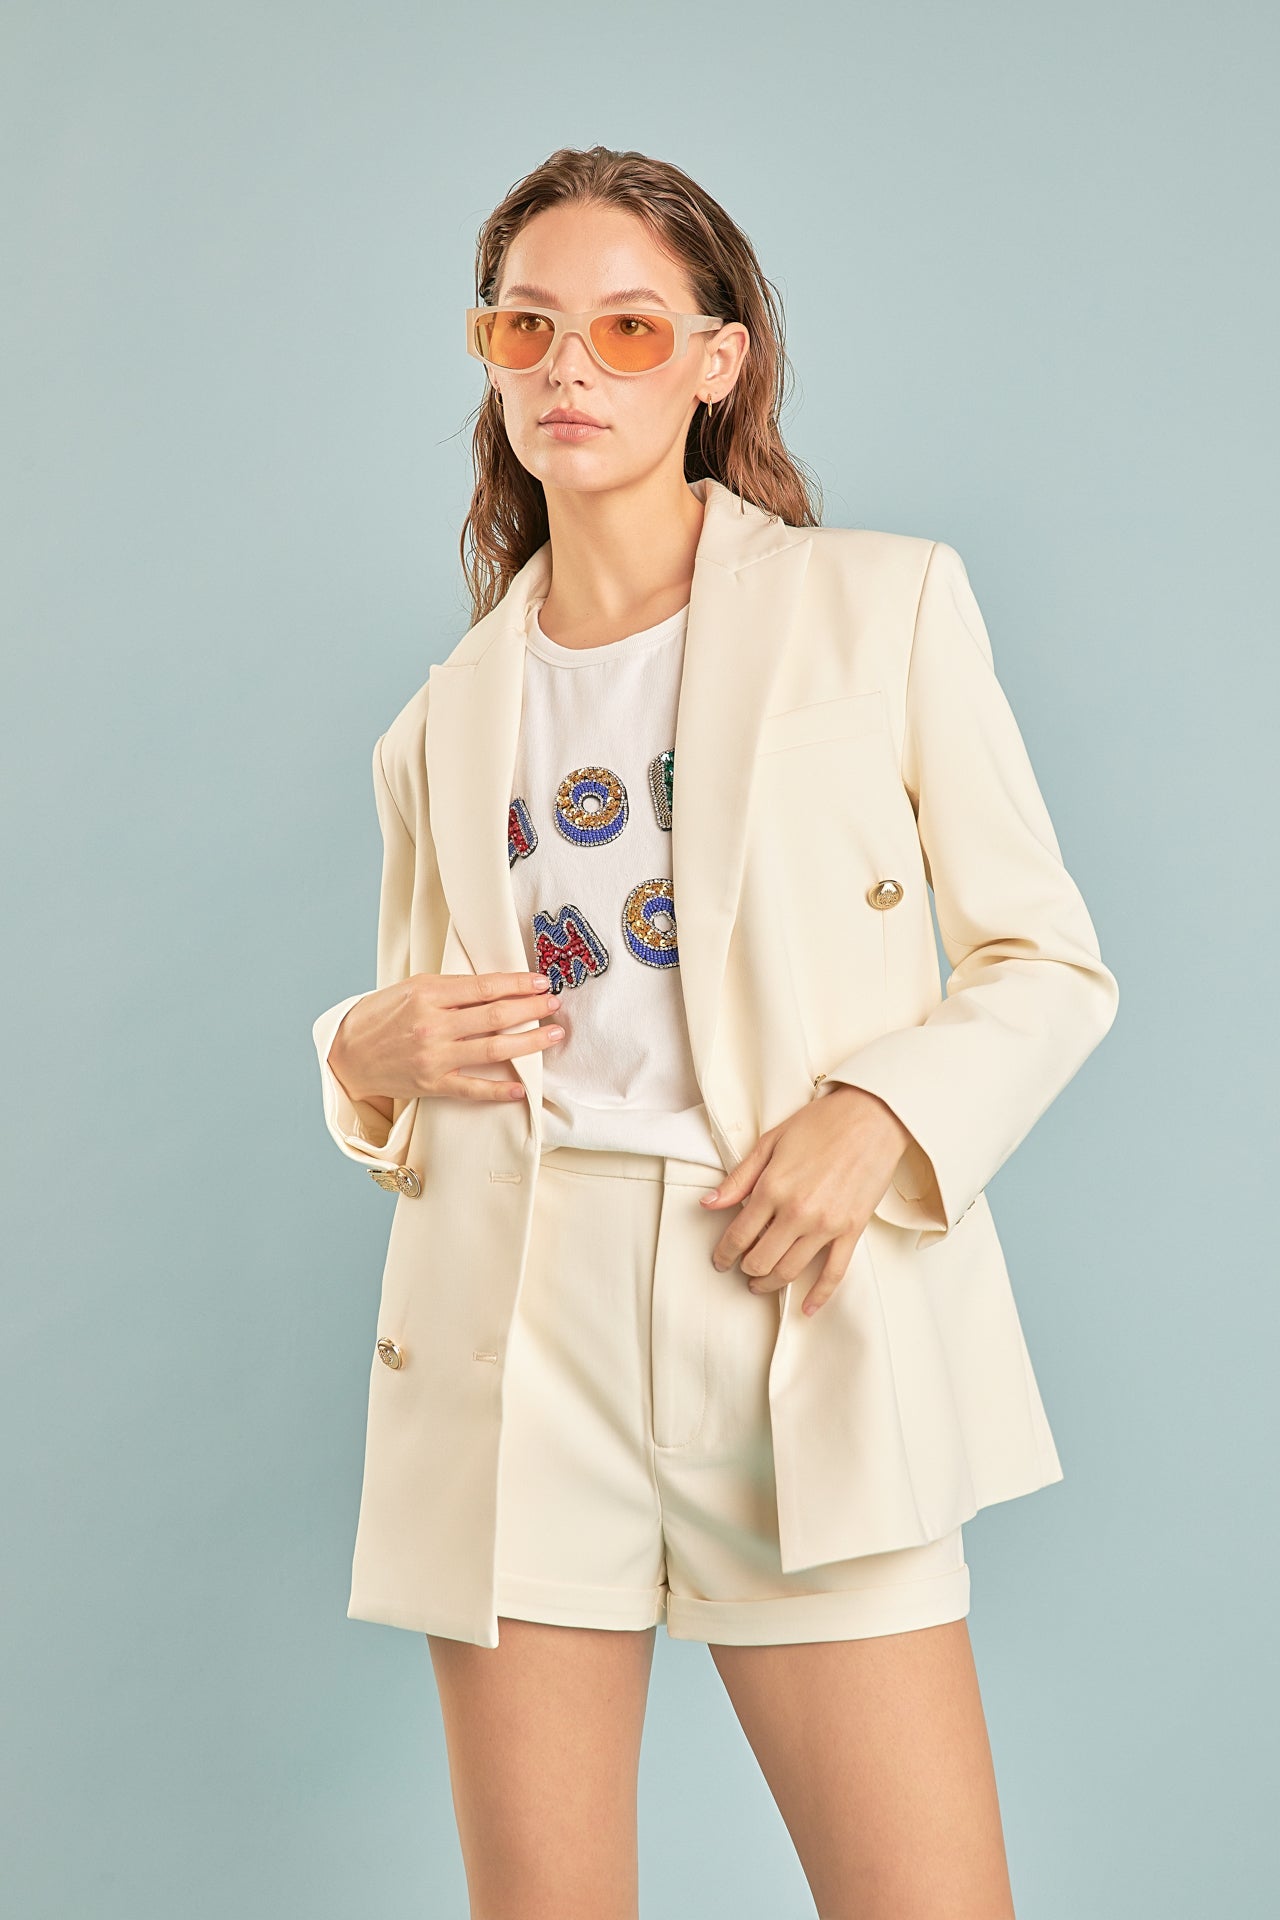 Double Breasted Suit Blazer, Low Rise Shorts, and More Amore Embellished Sweatshirt from Endless Rose